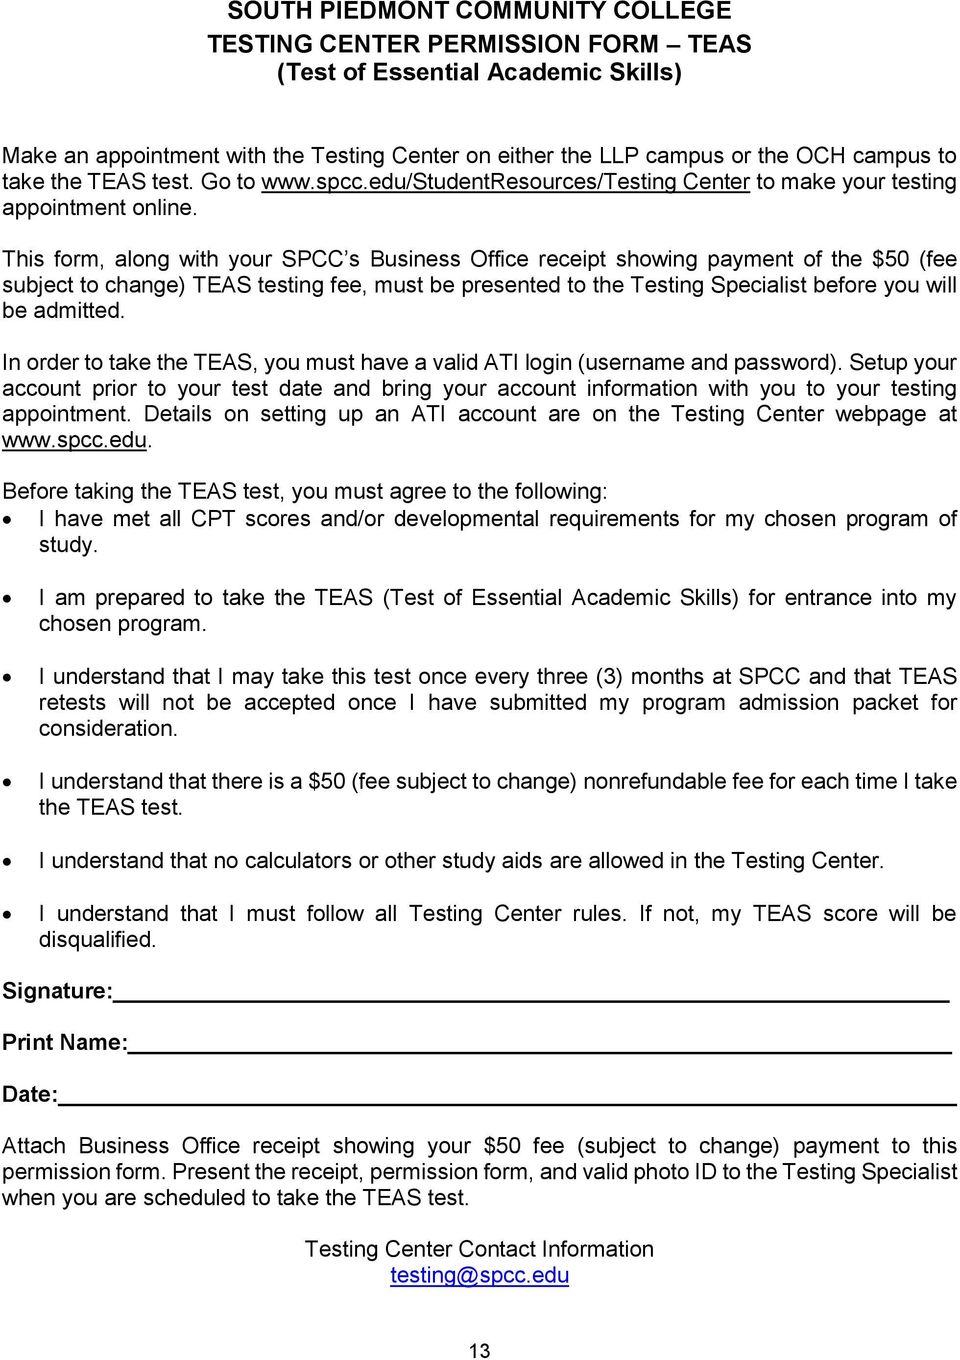 This form, along with your SPCC s Business Office receipt showing payment of the $50 (fee subject to change) TEAS testing fee, must be presented to the Testing Specialist before you will be admitted.